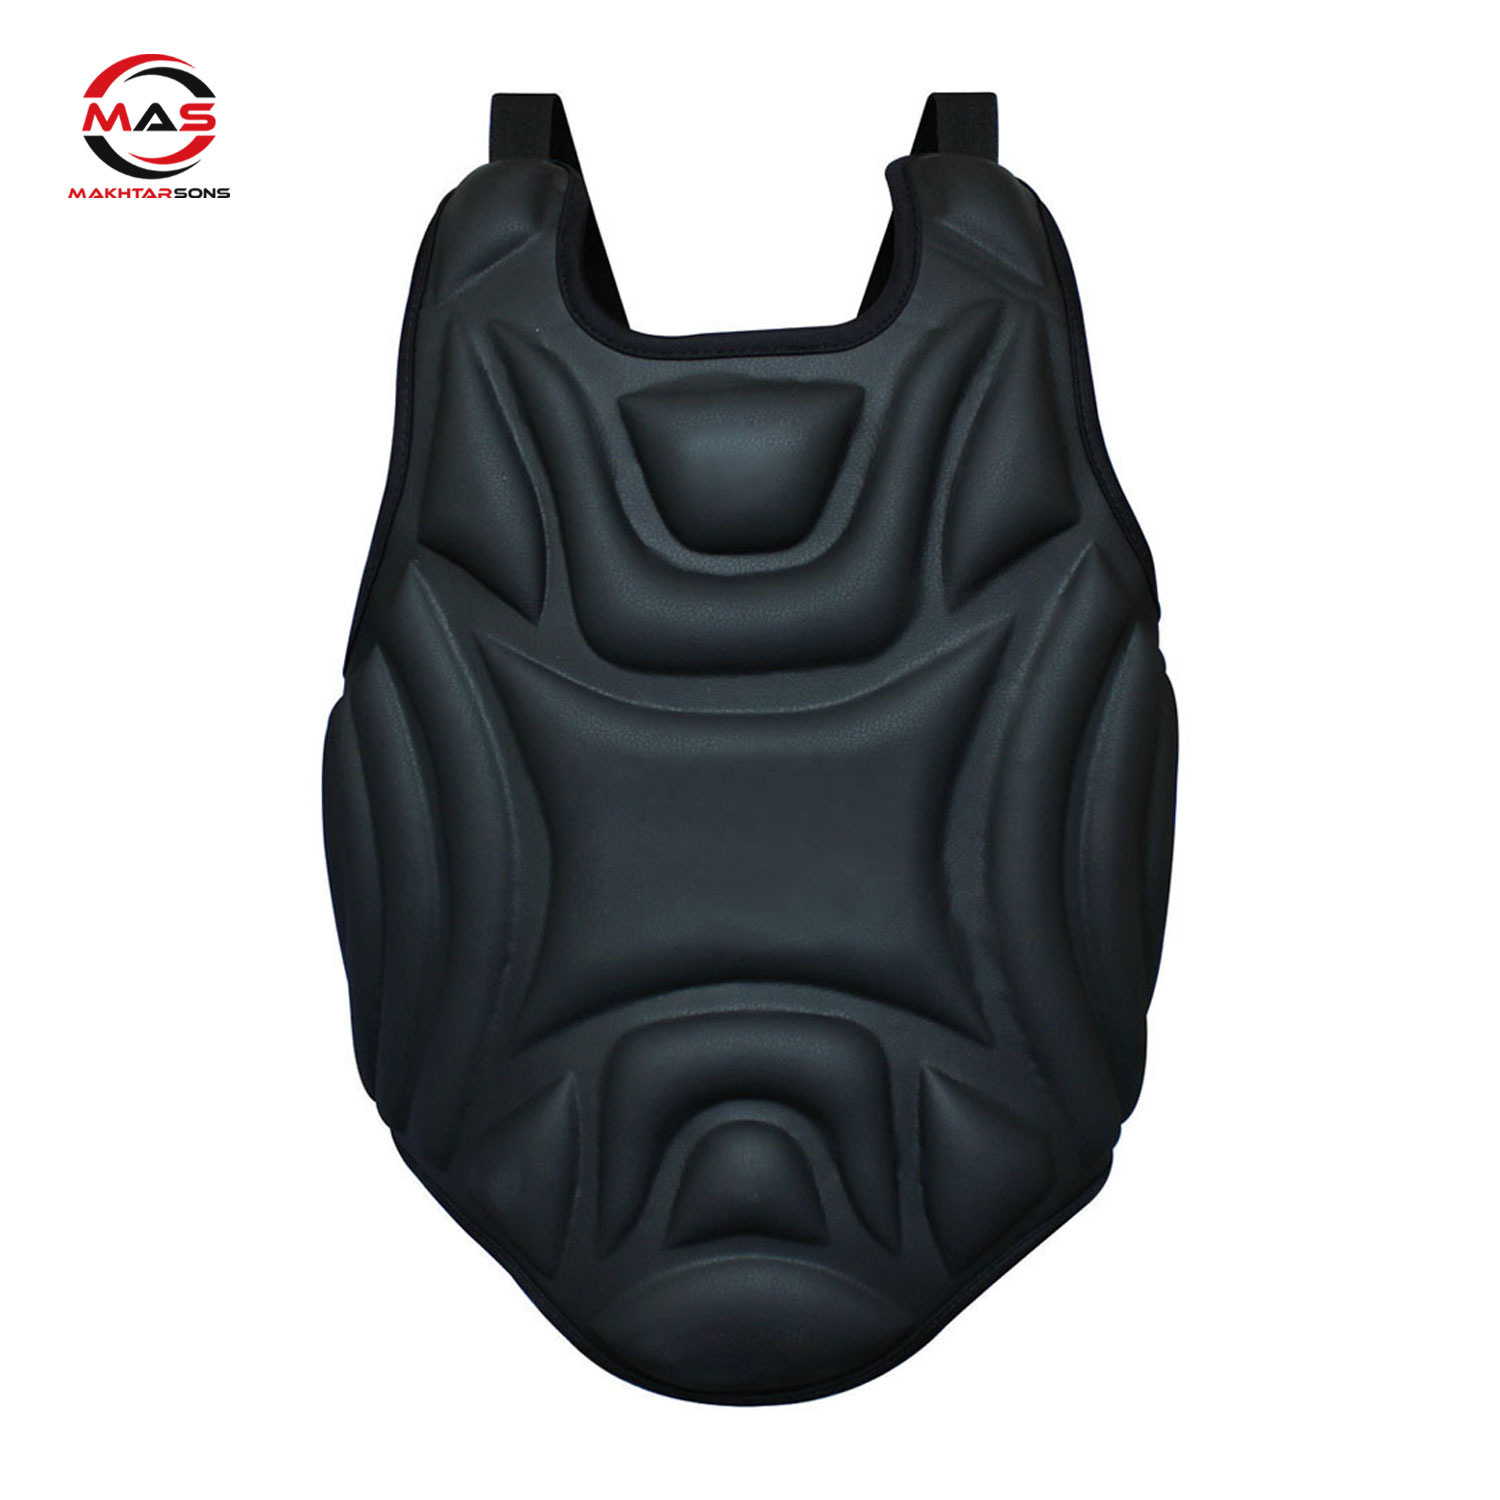 BODY CHEST PROTECTOR | MAS 278